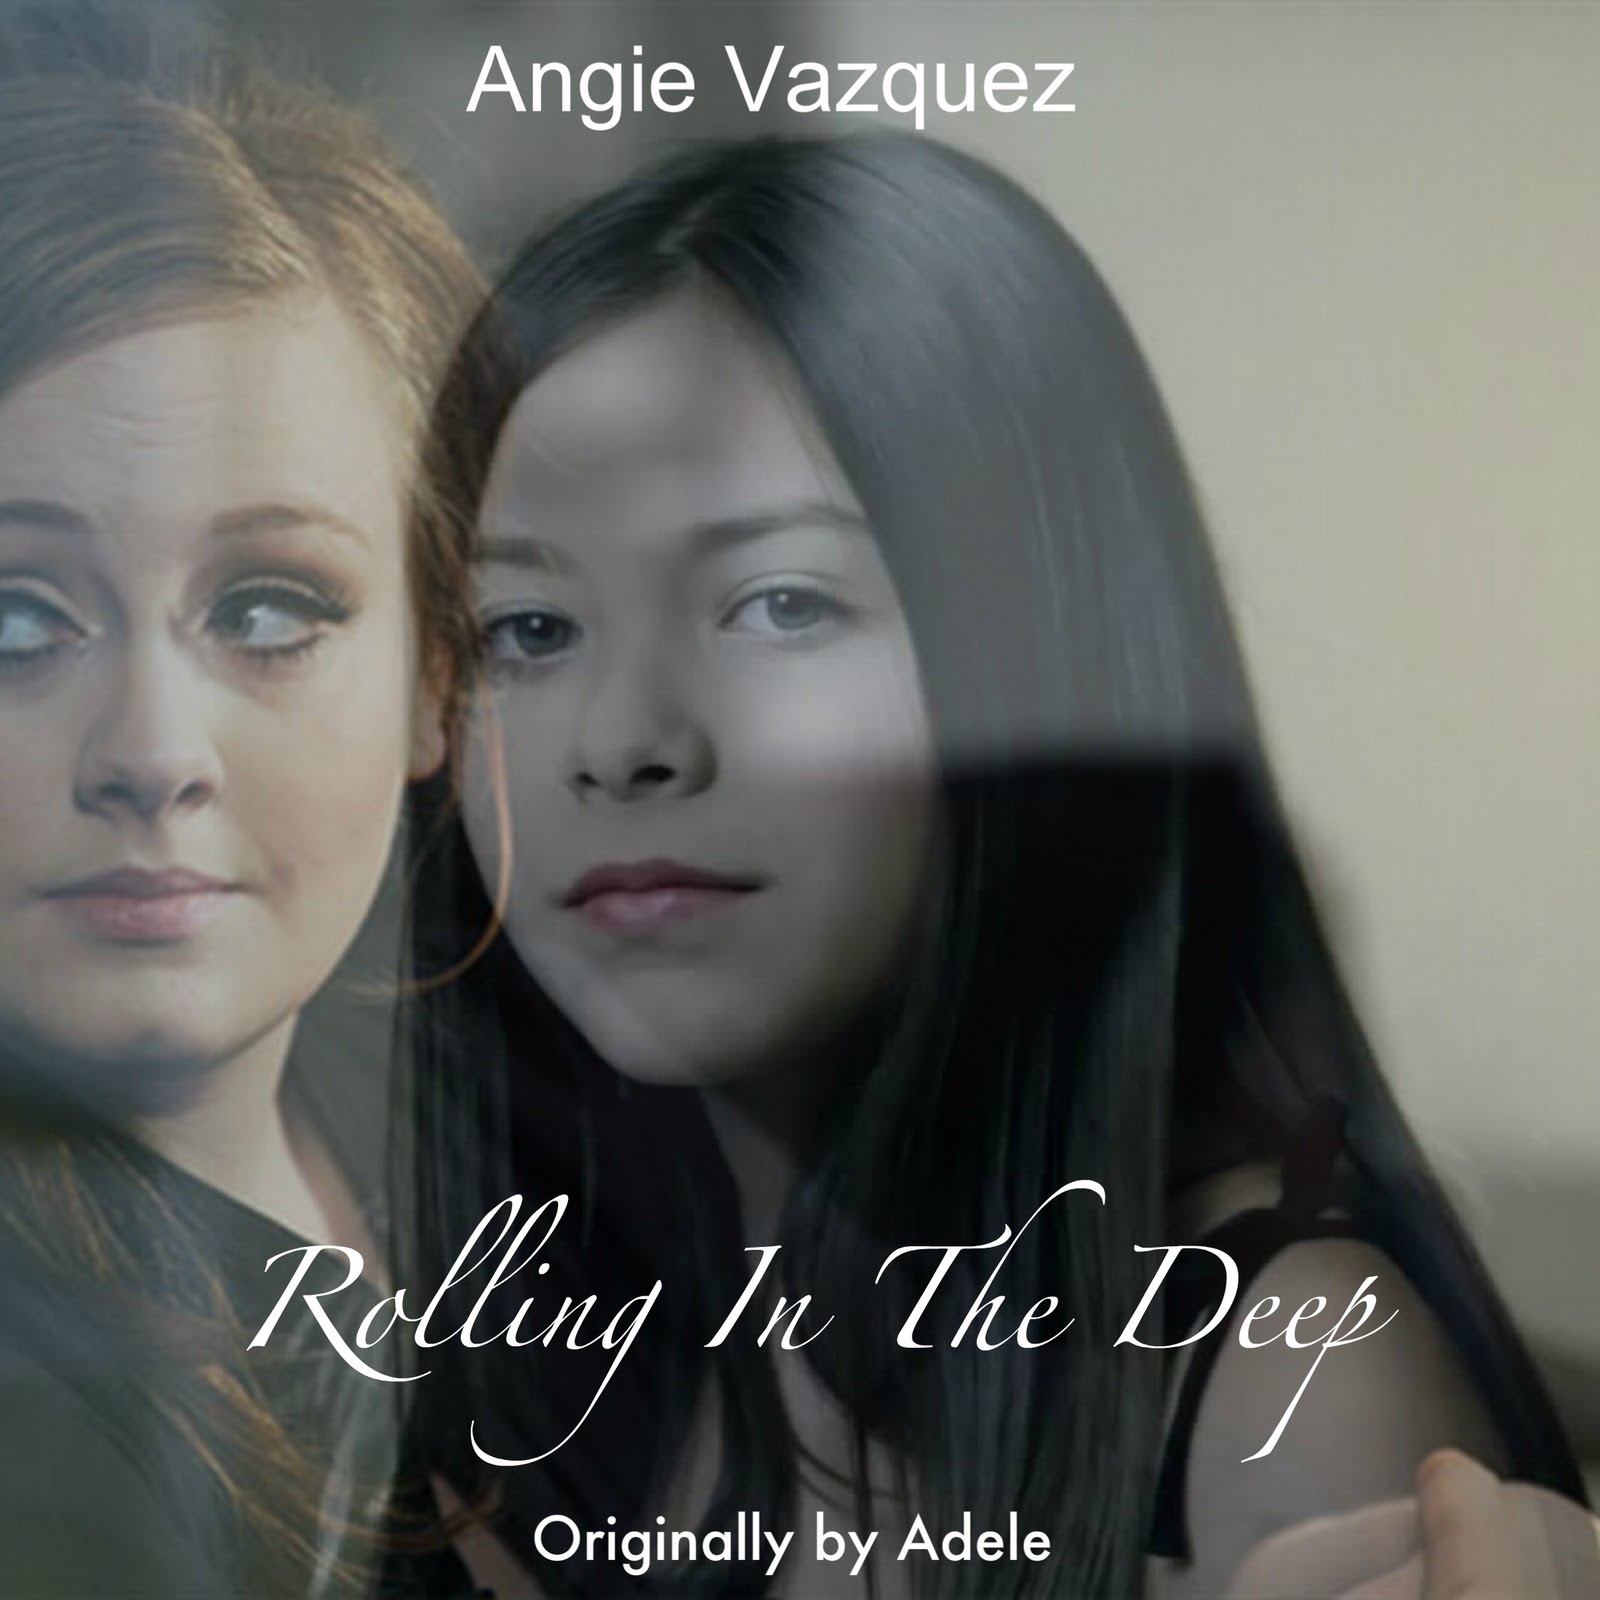 Adele Rolling In The Deep Album Cover - Dc Community Angie Vazquez ...